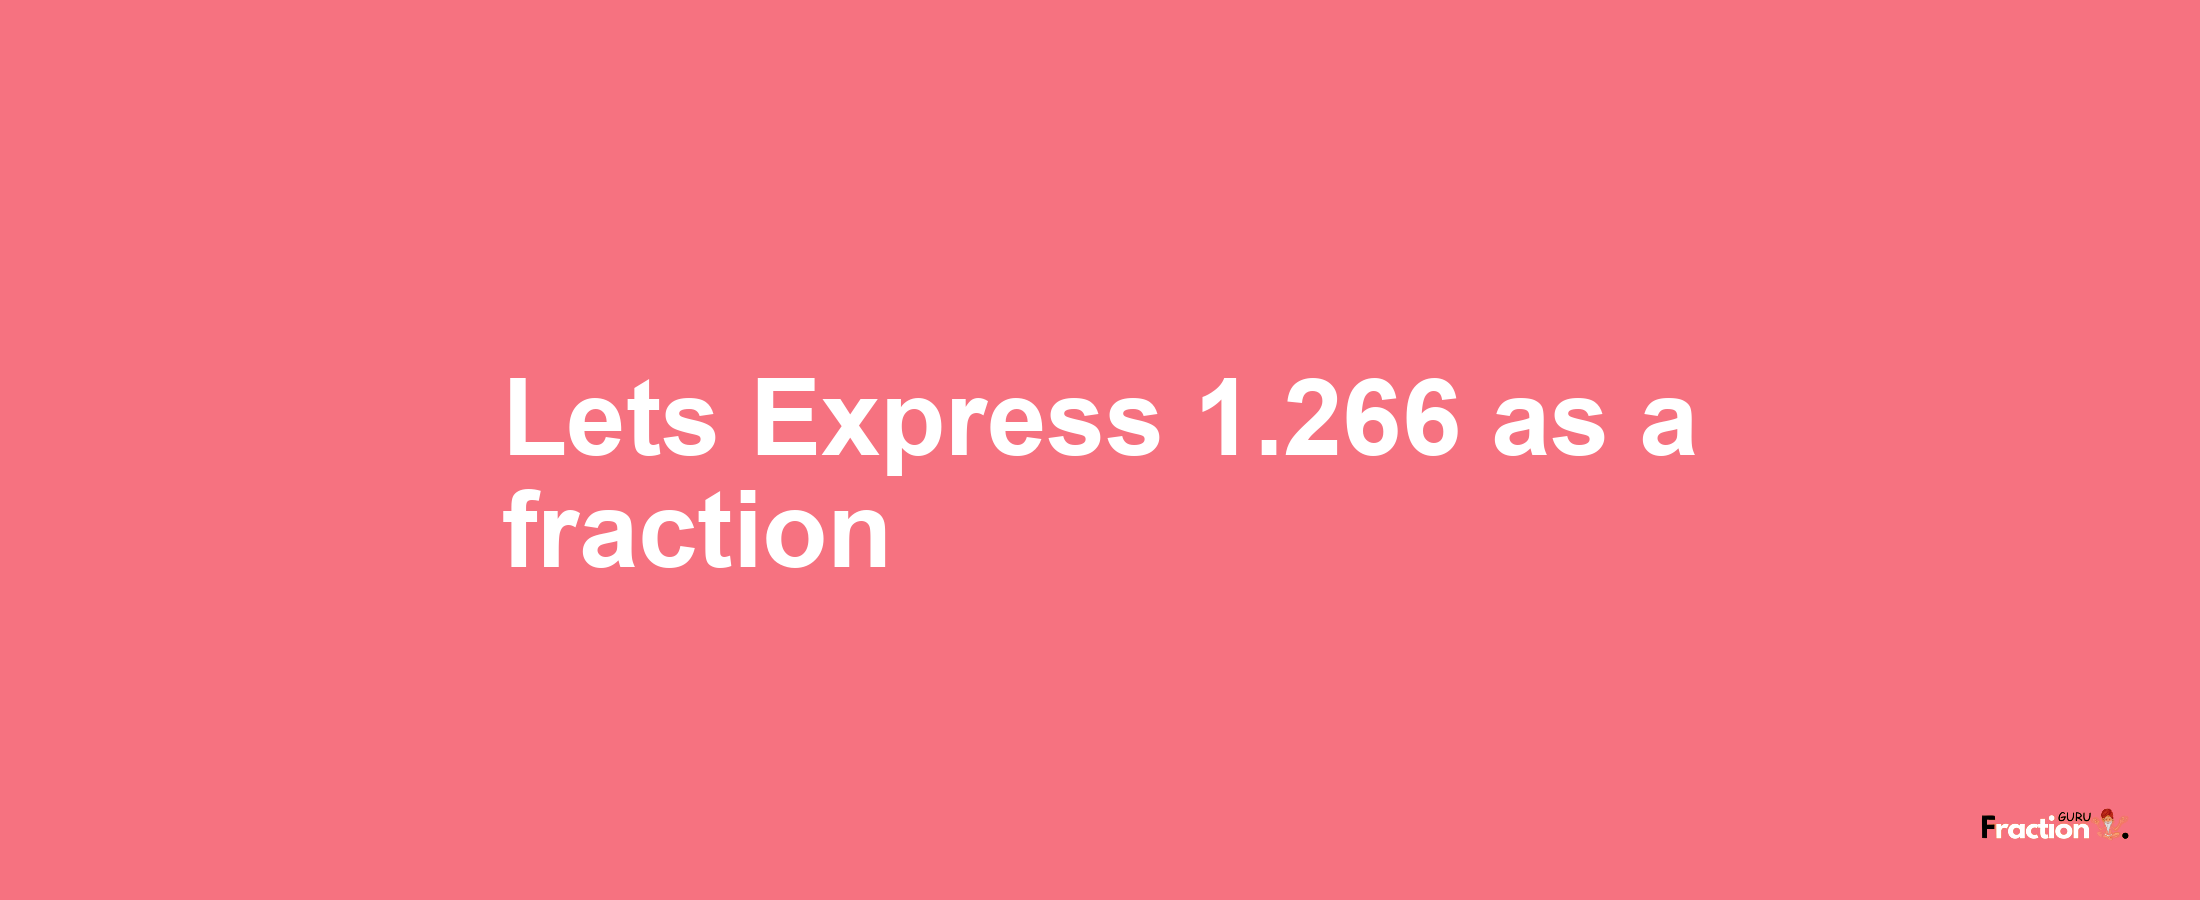 Lets Express 1.266 as afraction